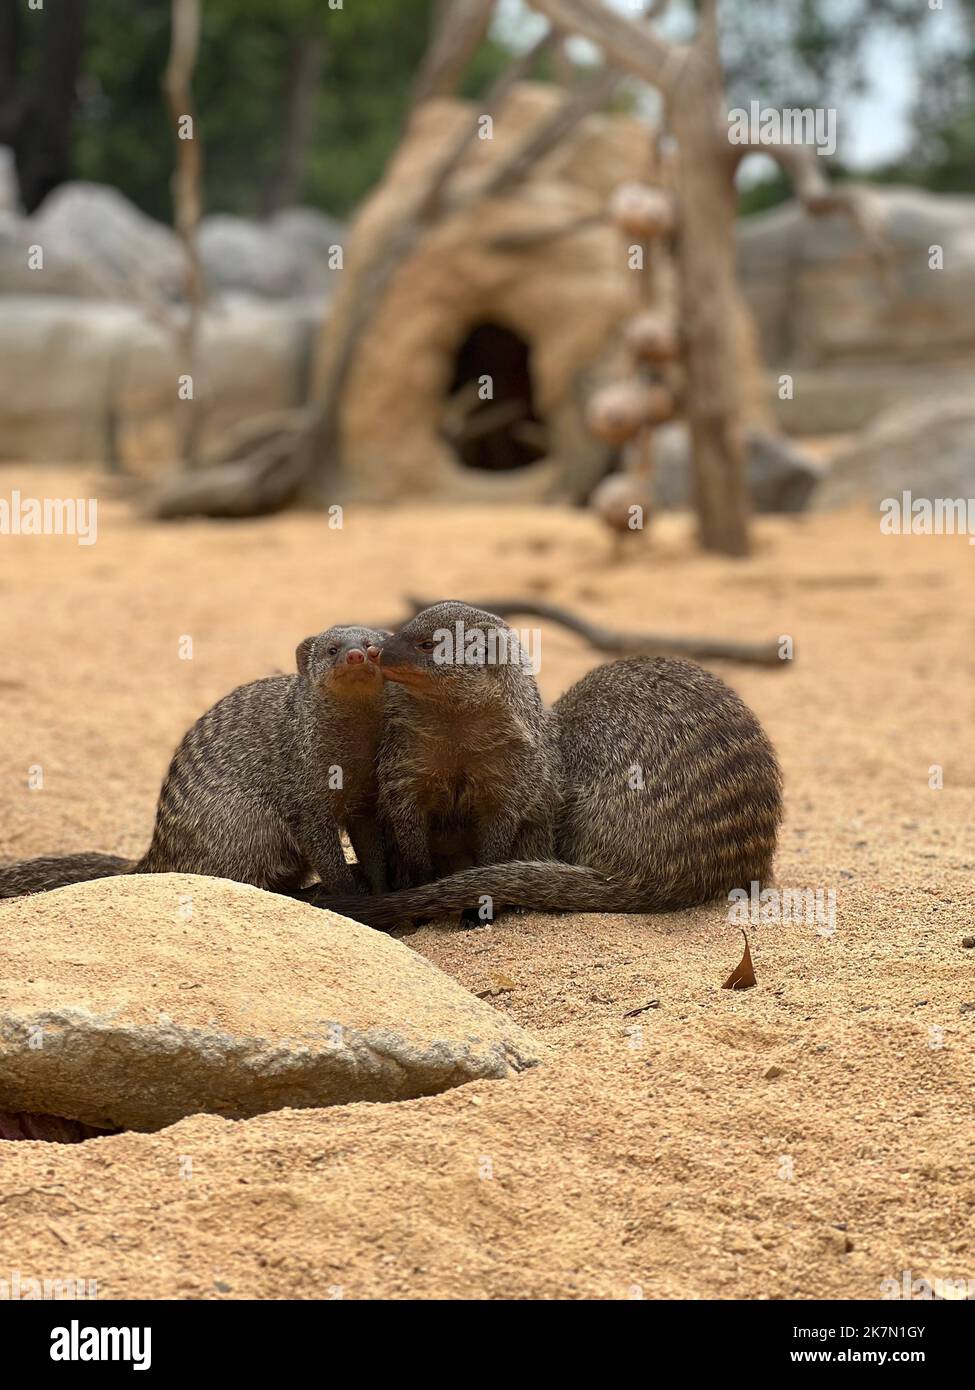 A group of cute little banded mongooses playing in the sand at a zoo, vertical shot Stock Photo